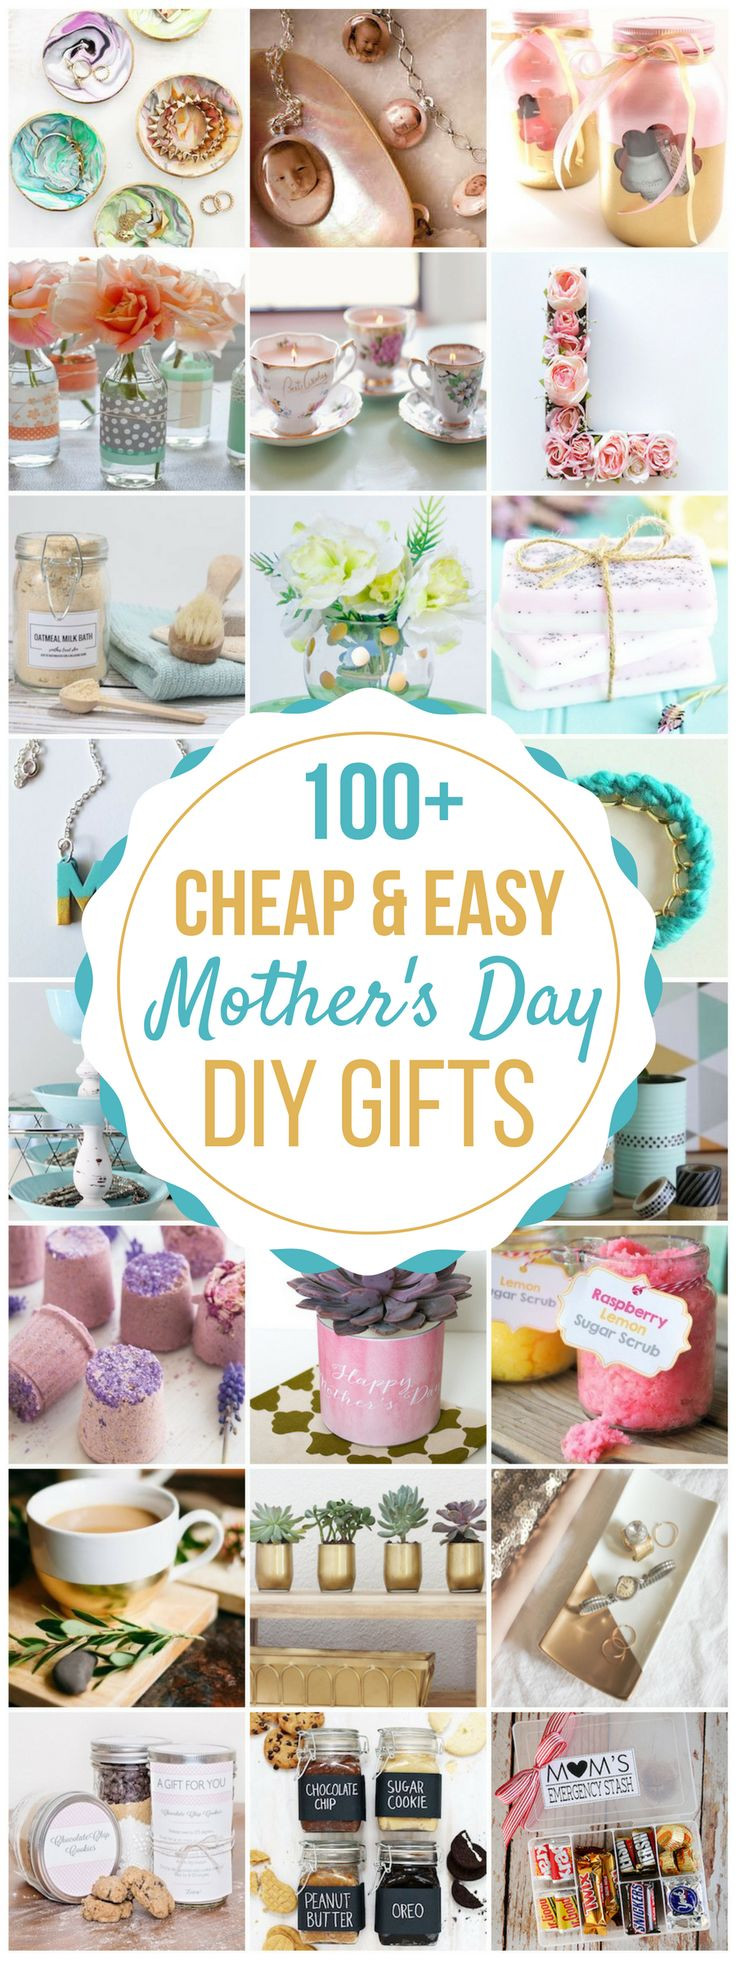 Easy DIY Gifts For Mom
 17 Best images about Homemade Gift Ideas on Pinterest